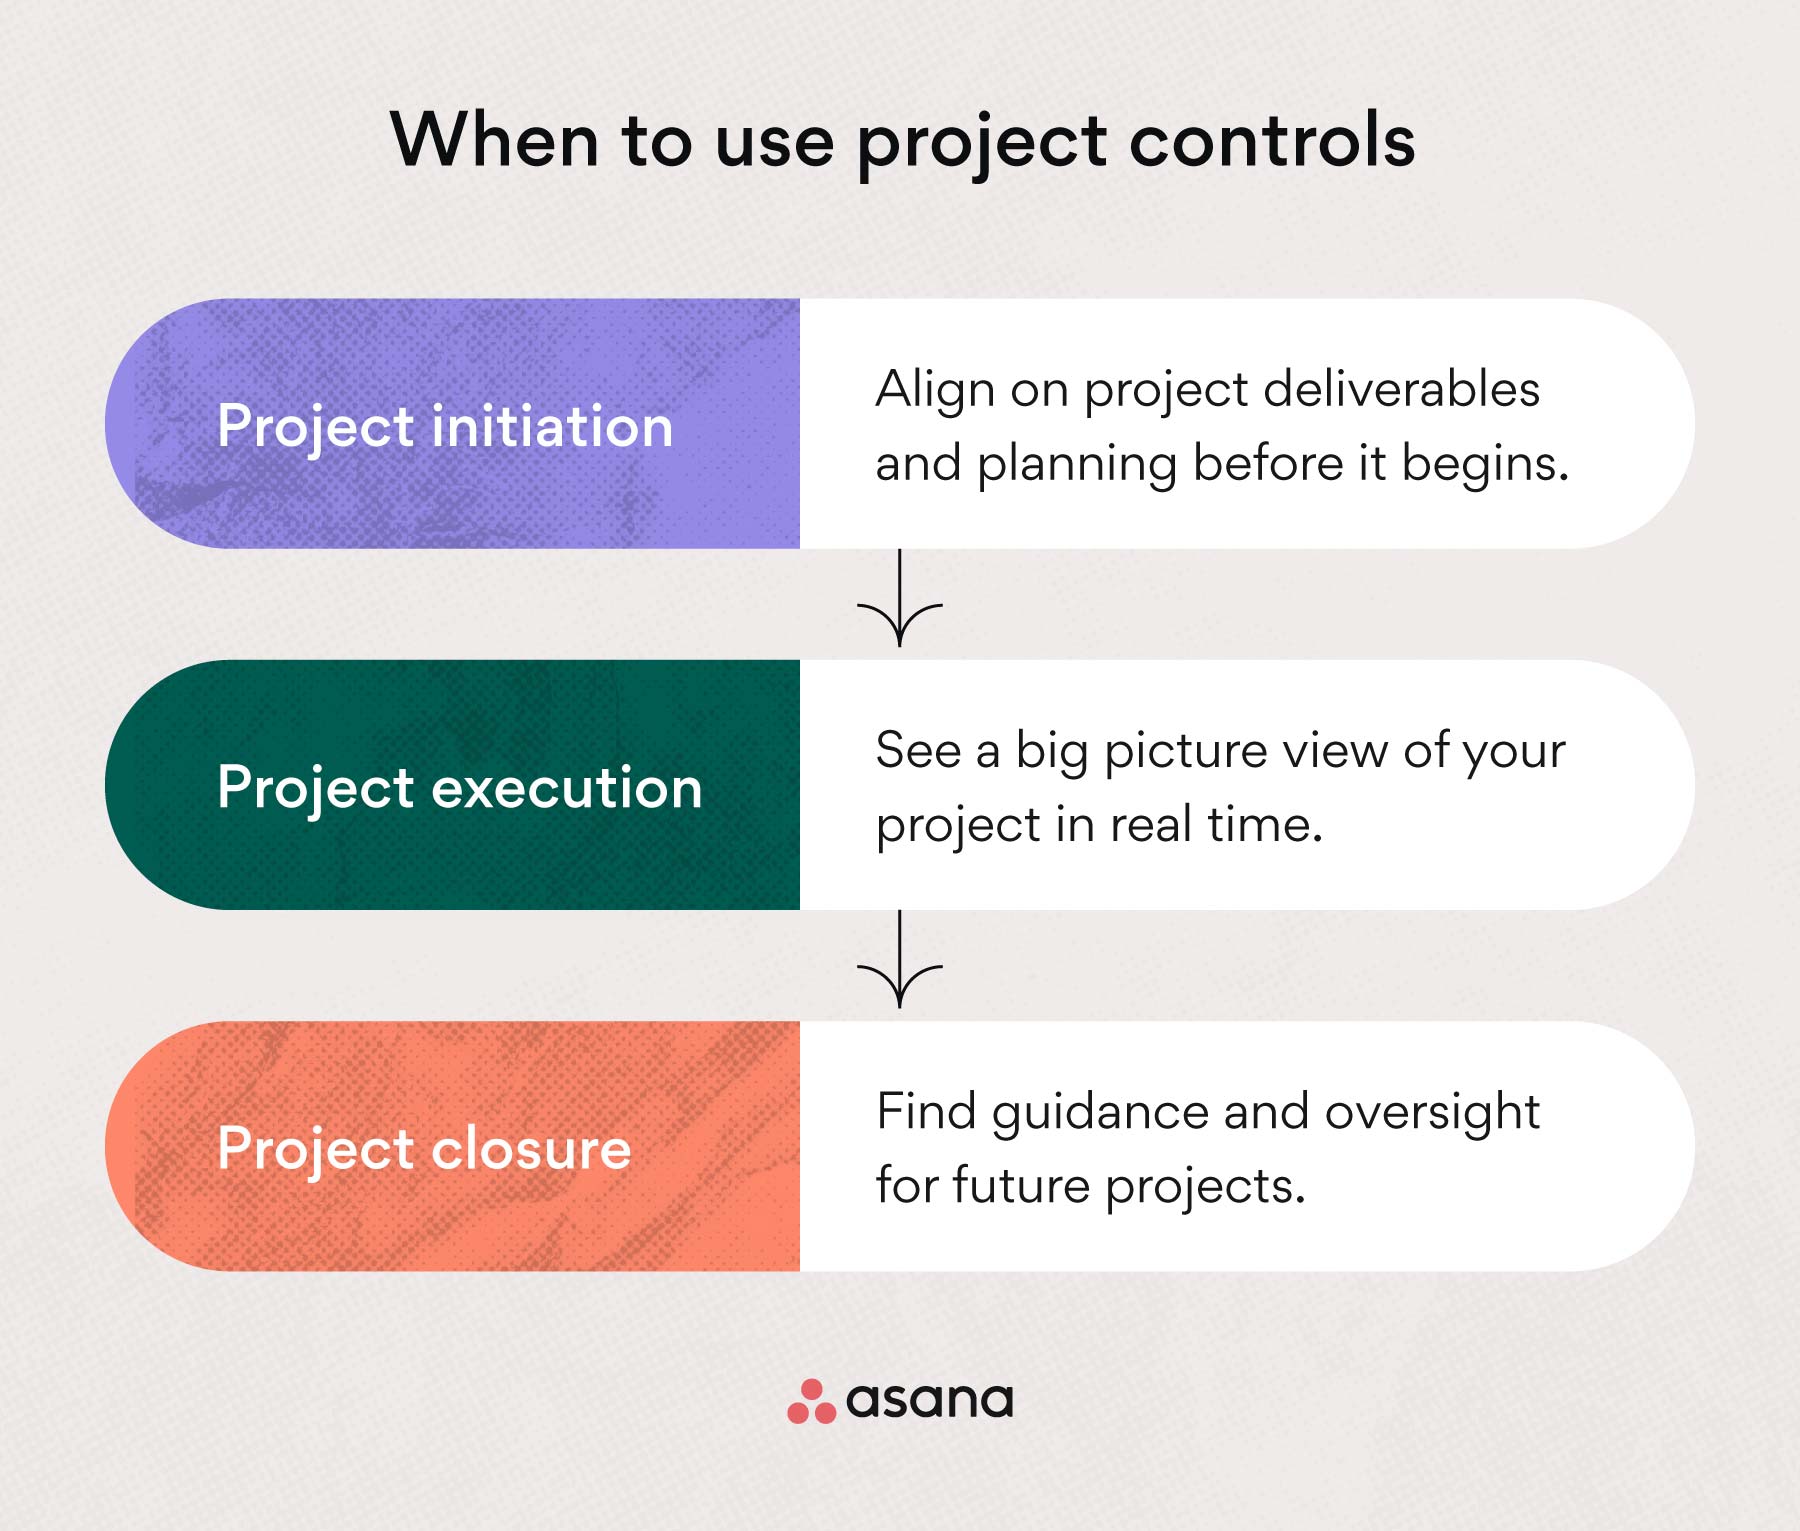 [inline illustration] Where to implement project controls (infographic)